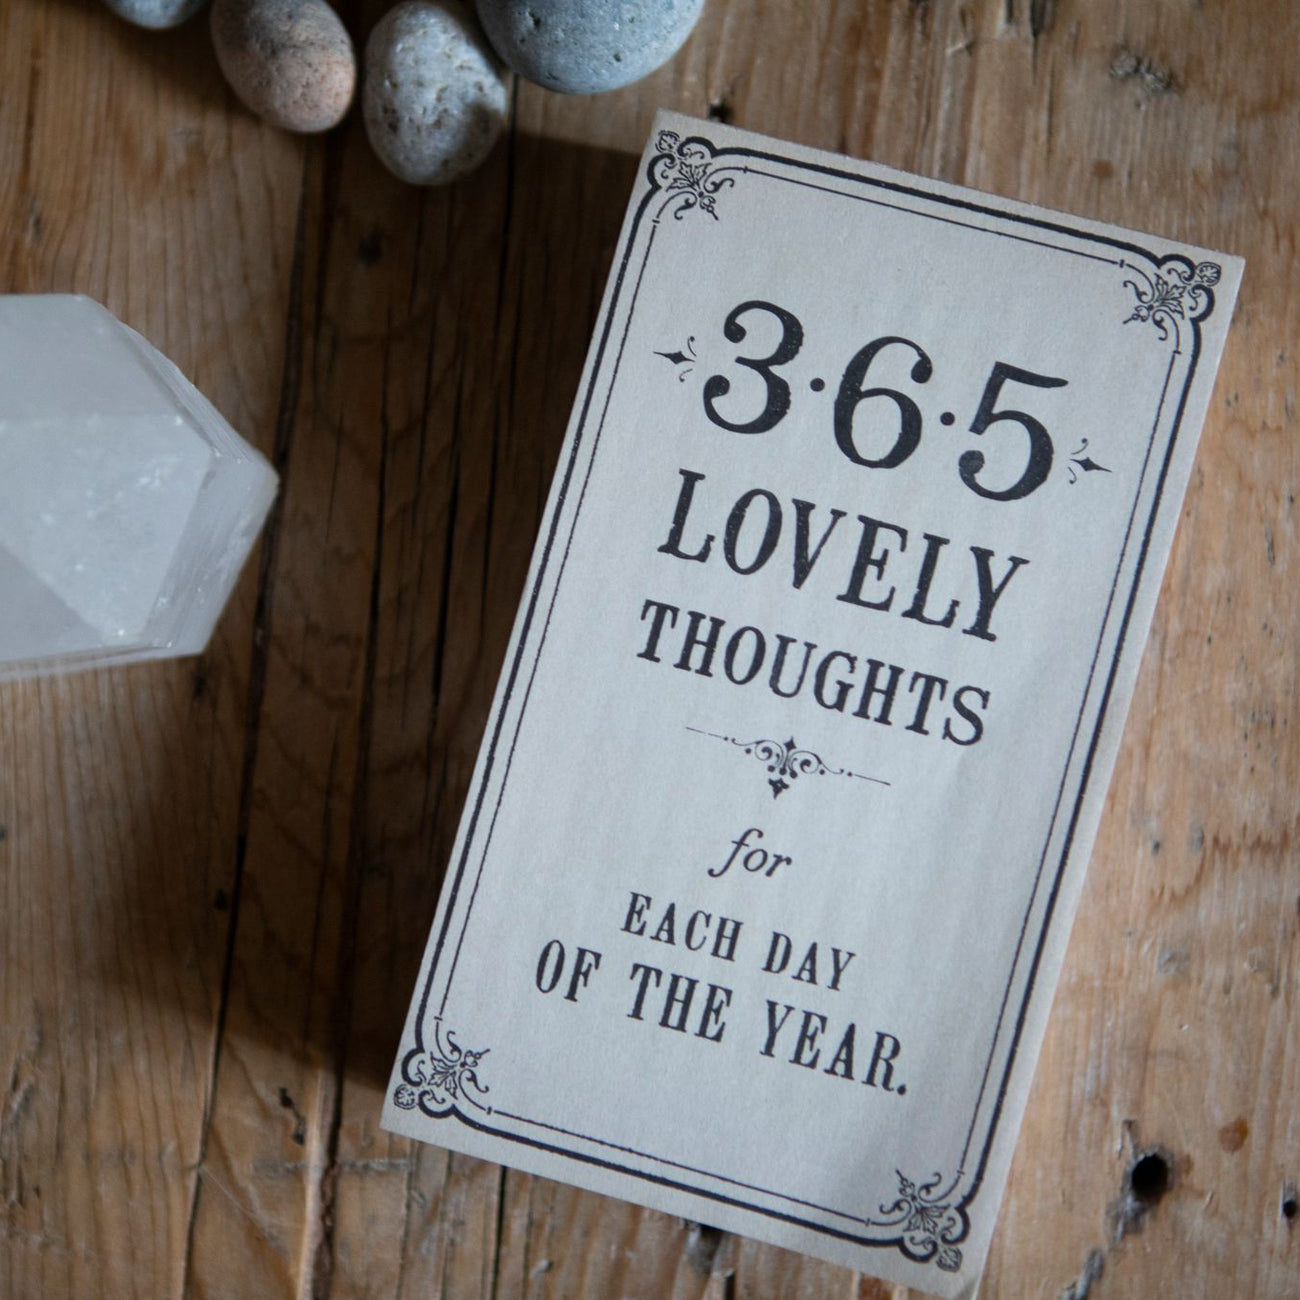 365 Gathered Thoughts for Each Day of the Year